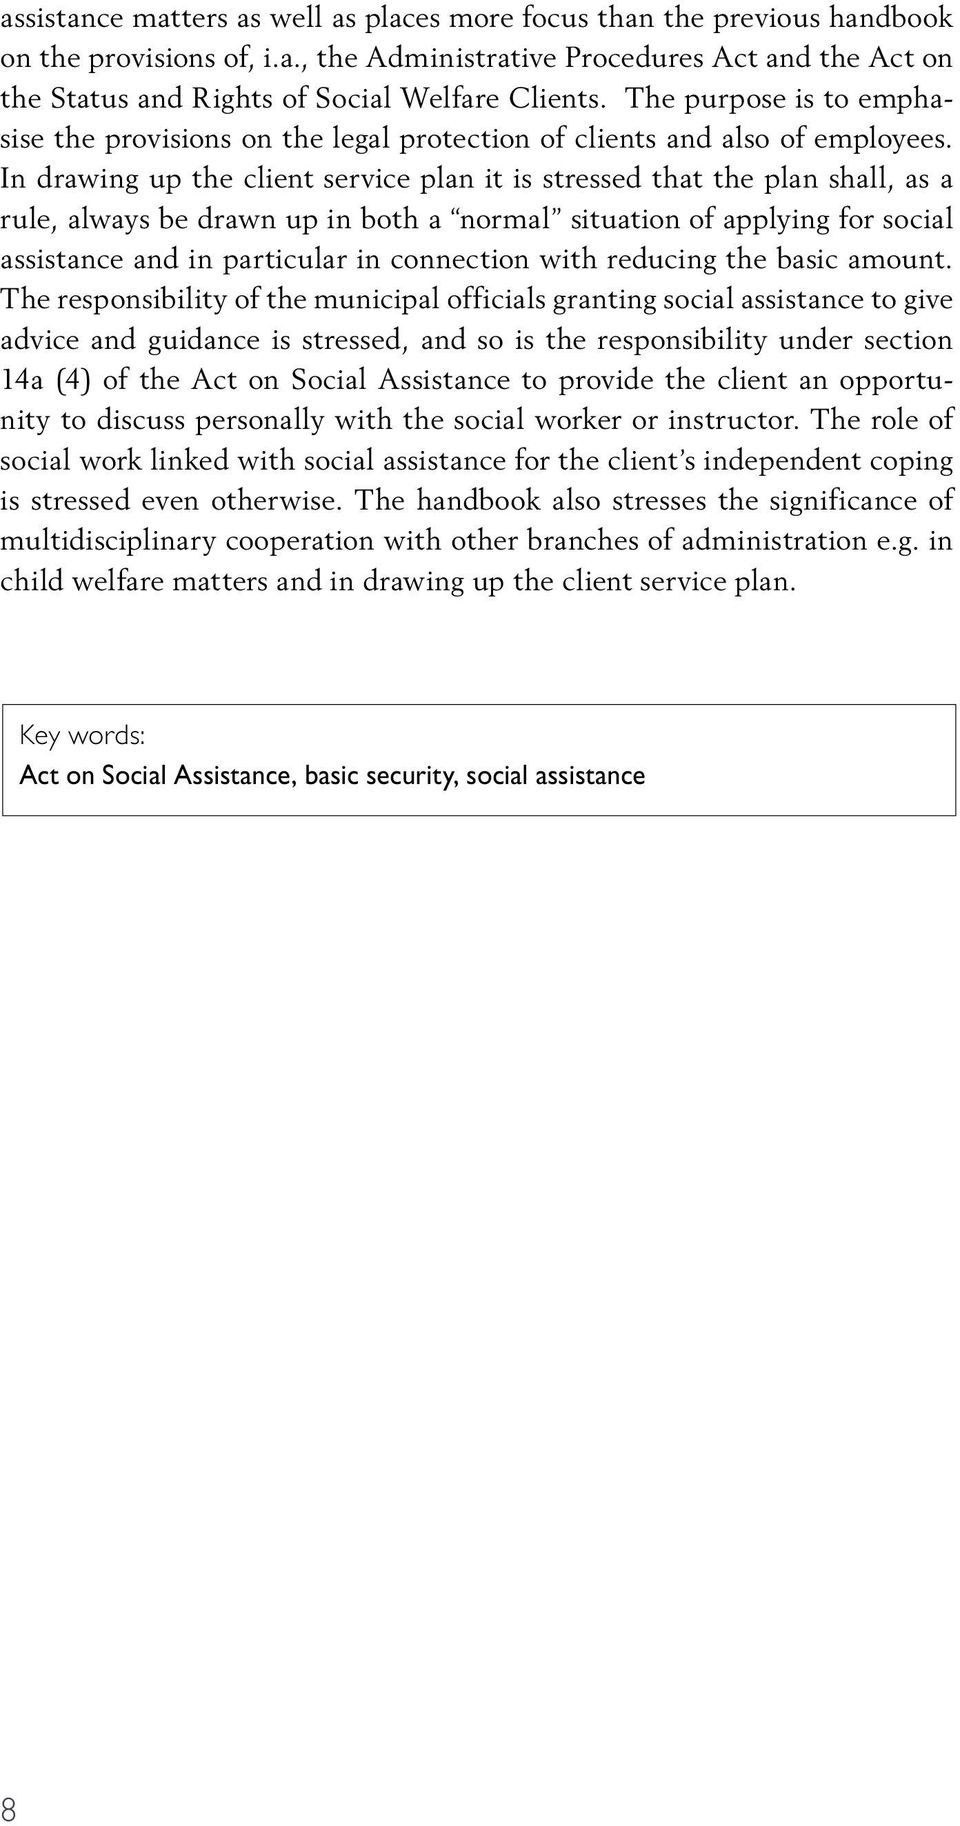 In drawing up the client service plan it is stressed that the plan shall, as a rule, always be drawn up in both a normal situation of applying for social assistance and in particular in connection